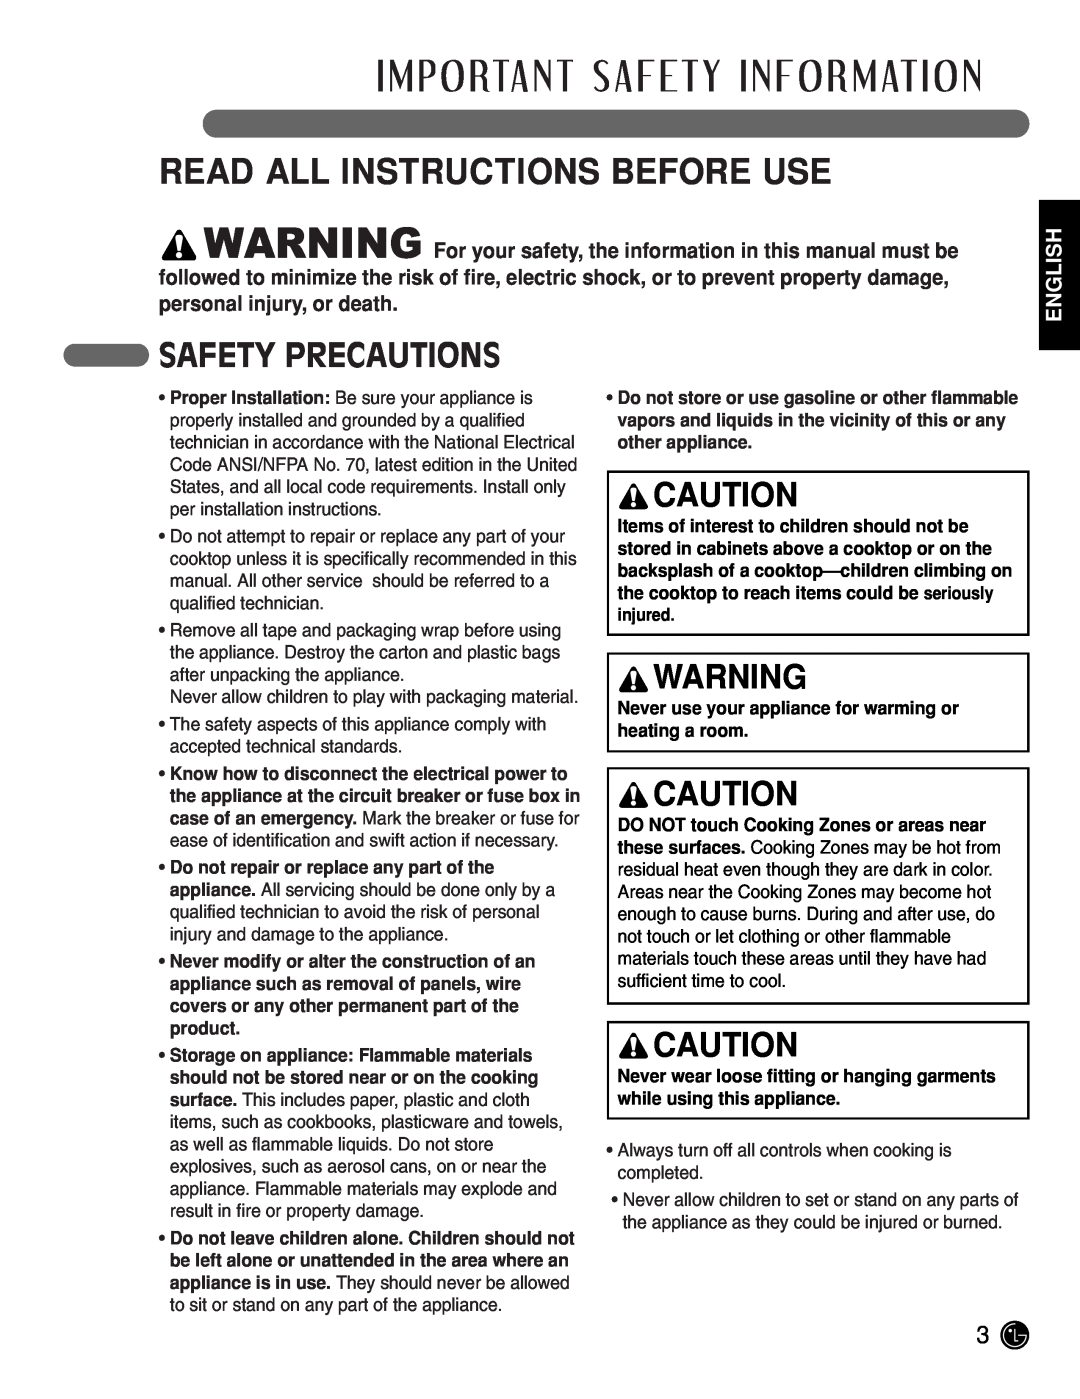 LG Electronics LCE3081ST, LCE3681ST manual Read All Instructions Before Use, Safety Precautions, English 